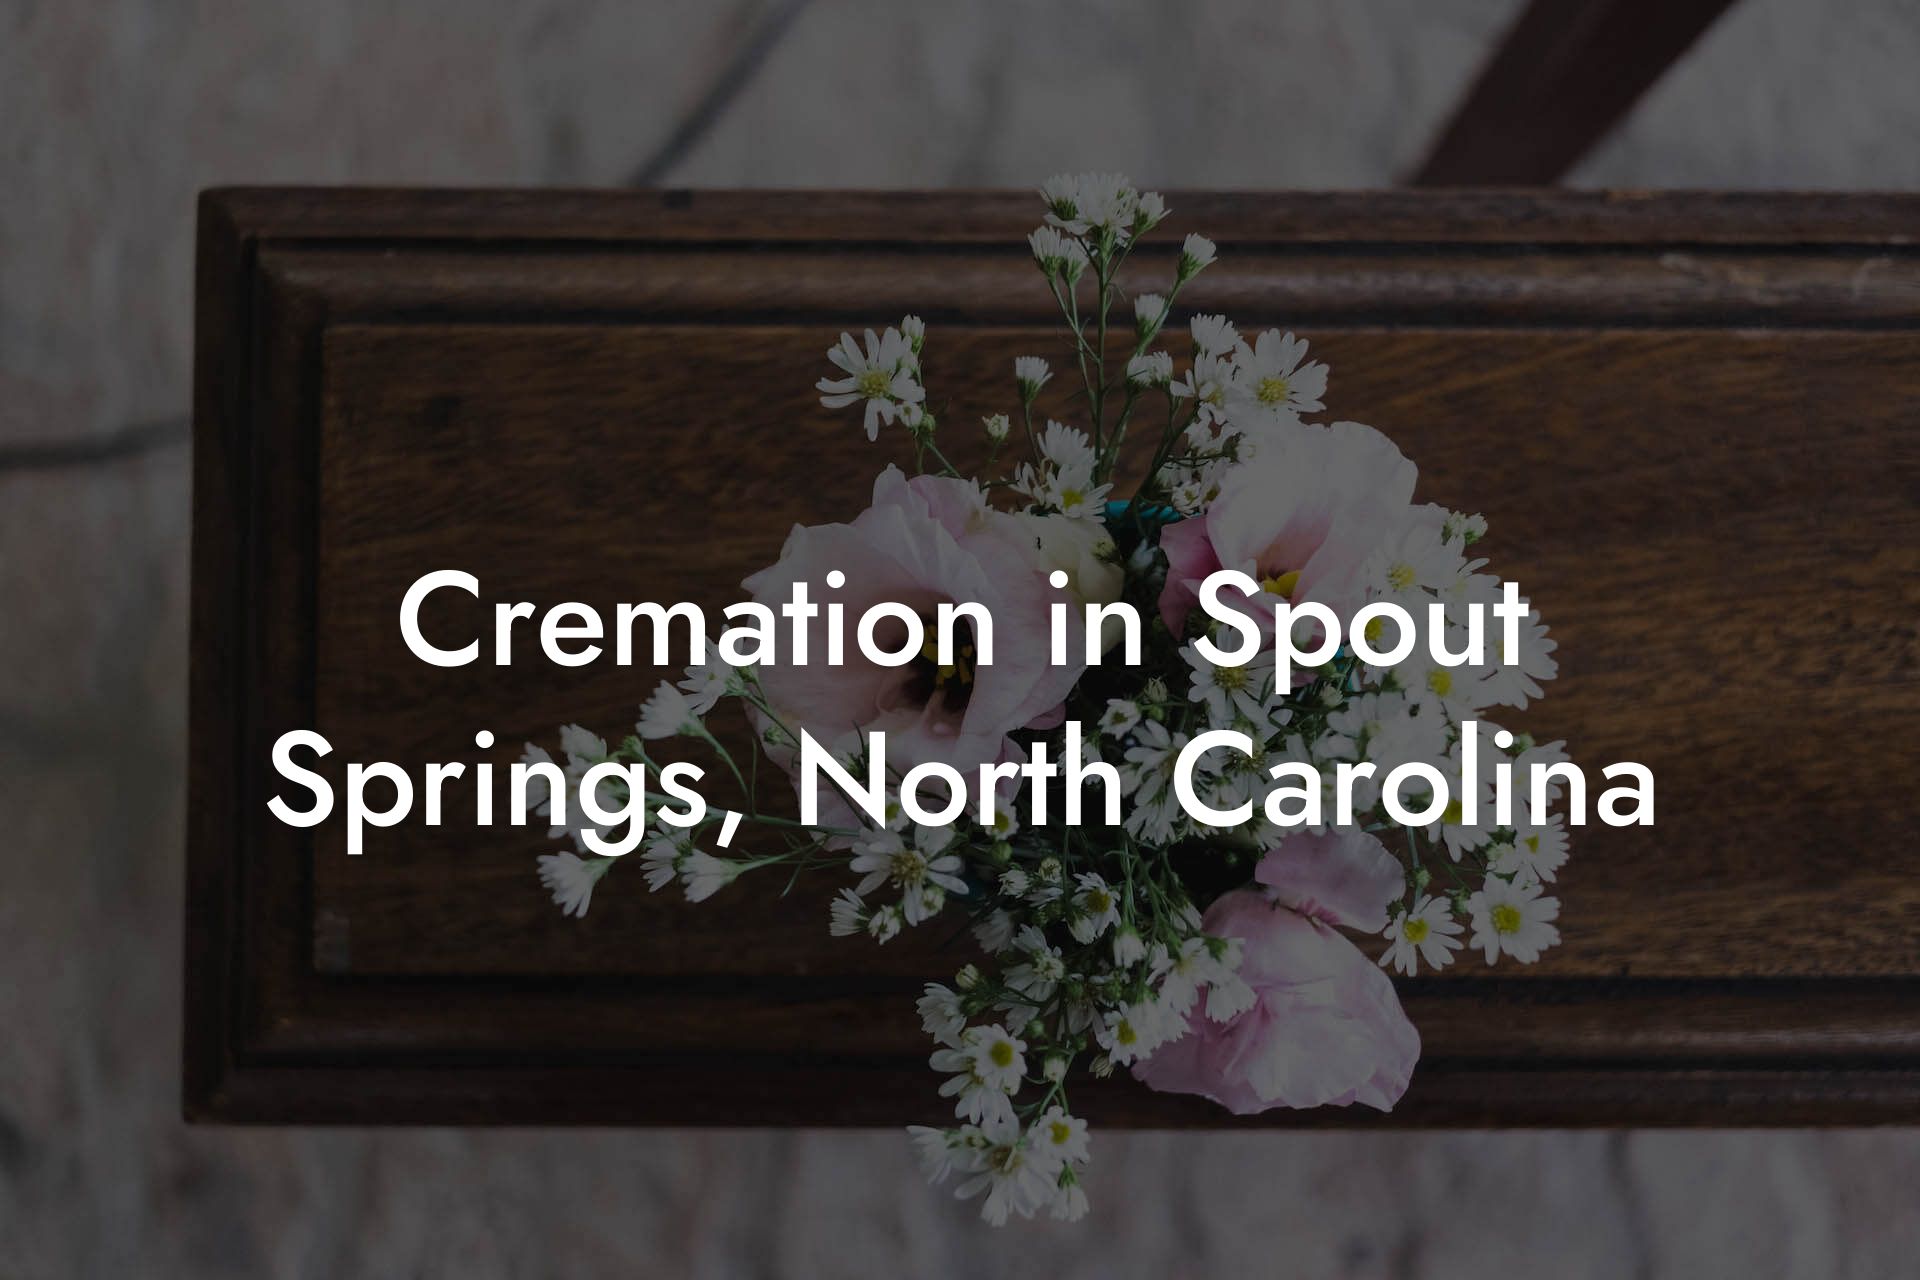 Cremation in Spout Springs, North Carolina